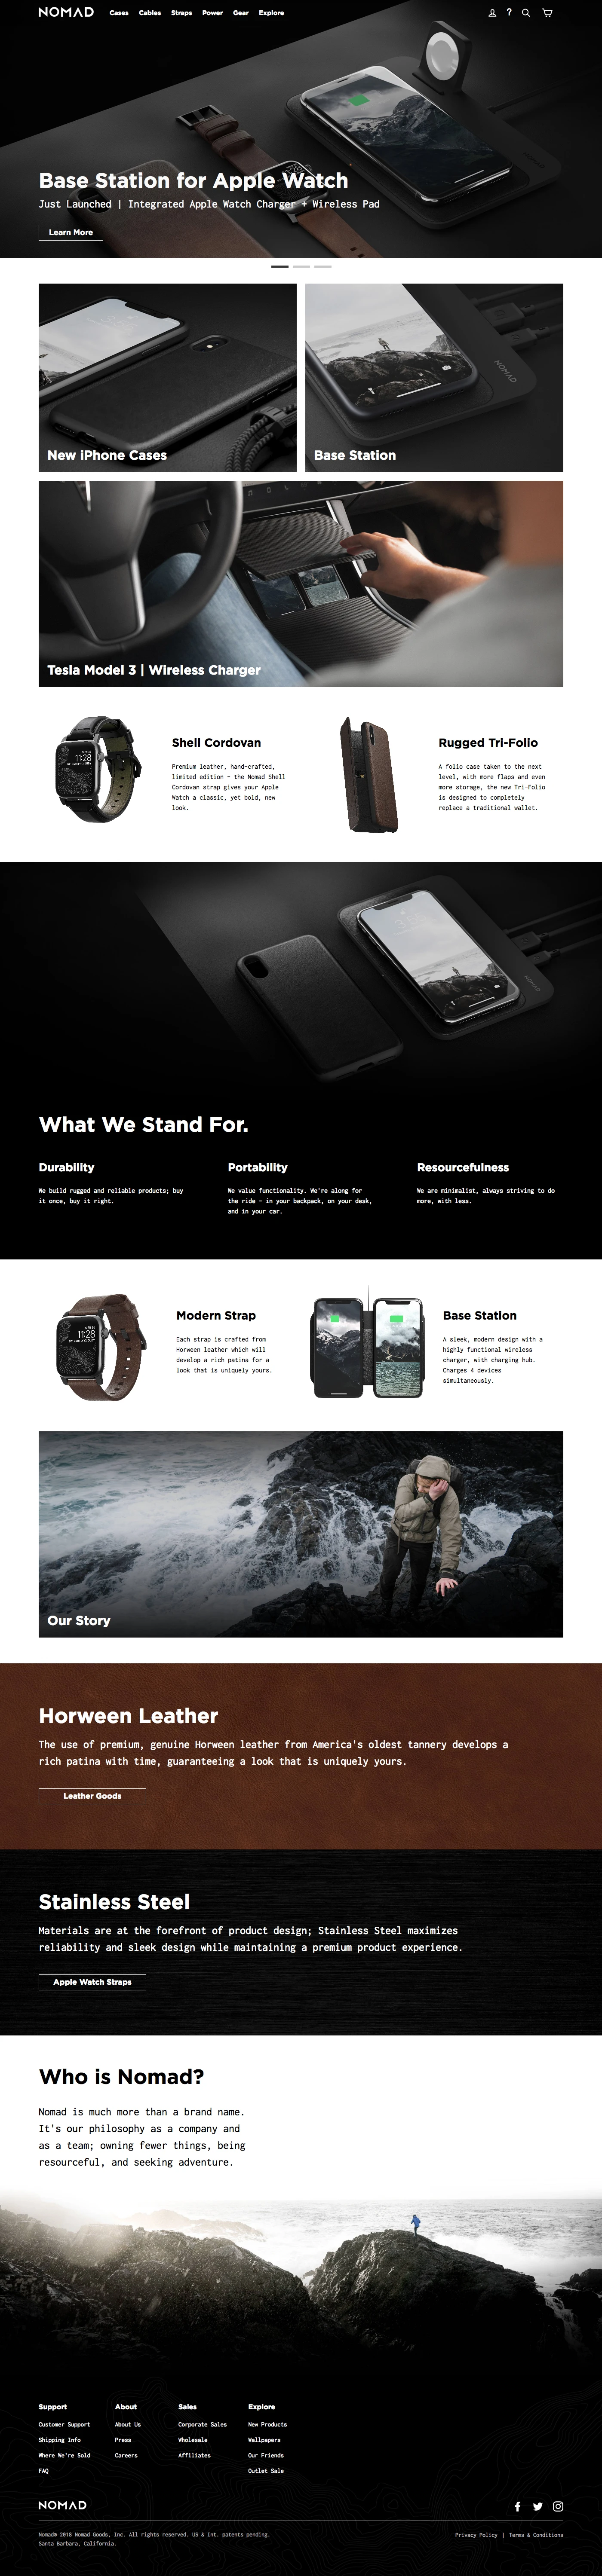 Nomad Landing Page Example: Shop iPhone cases & accessories made from the finest materials. Browse our specialized selection of Apple Watch Straps, suite of durable cables, and collection of products to keep you powered on the go. Made for the modern Nomad. Tools built for the modern Nomad